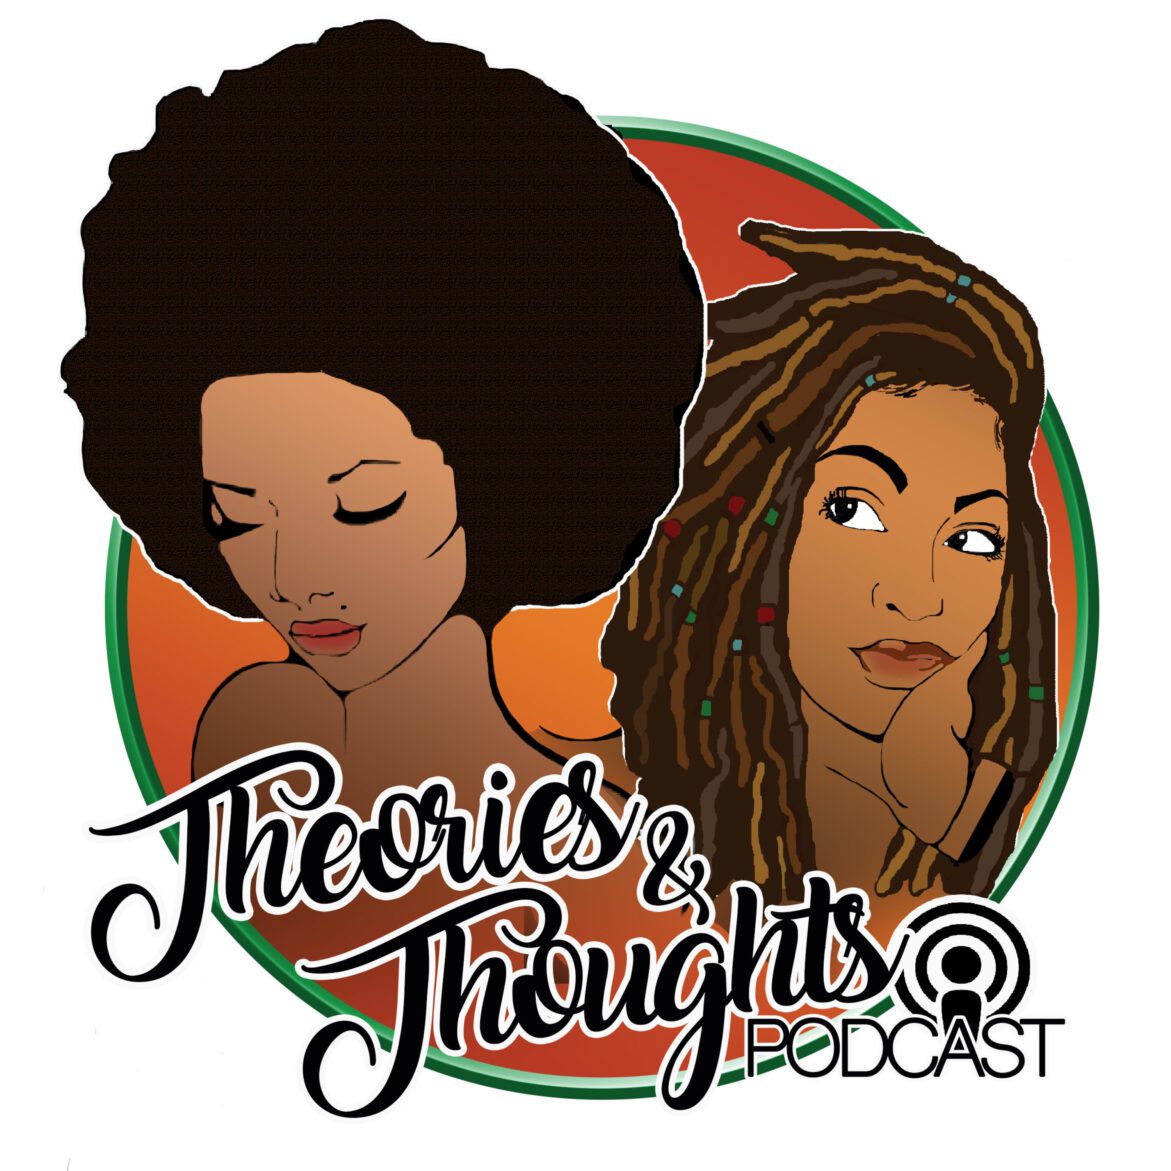 Black Podcasting - Theories & Thoughts: Episode 49- Thriving after Domestic Violence with Brittney Bogues